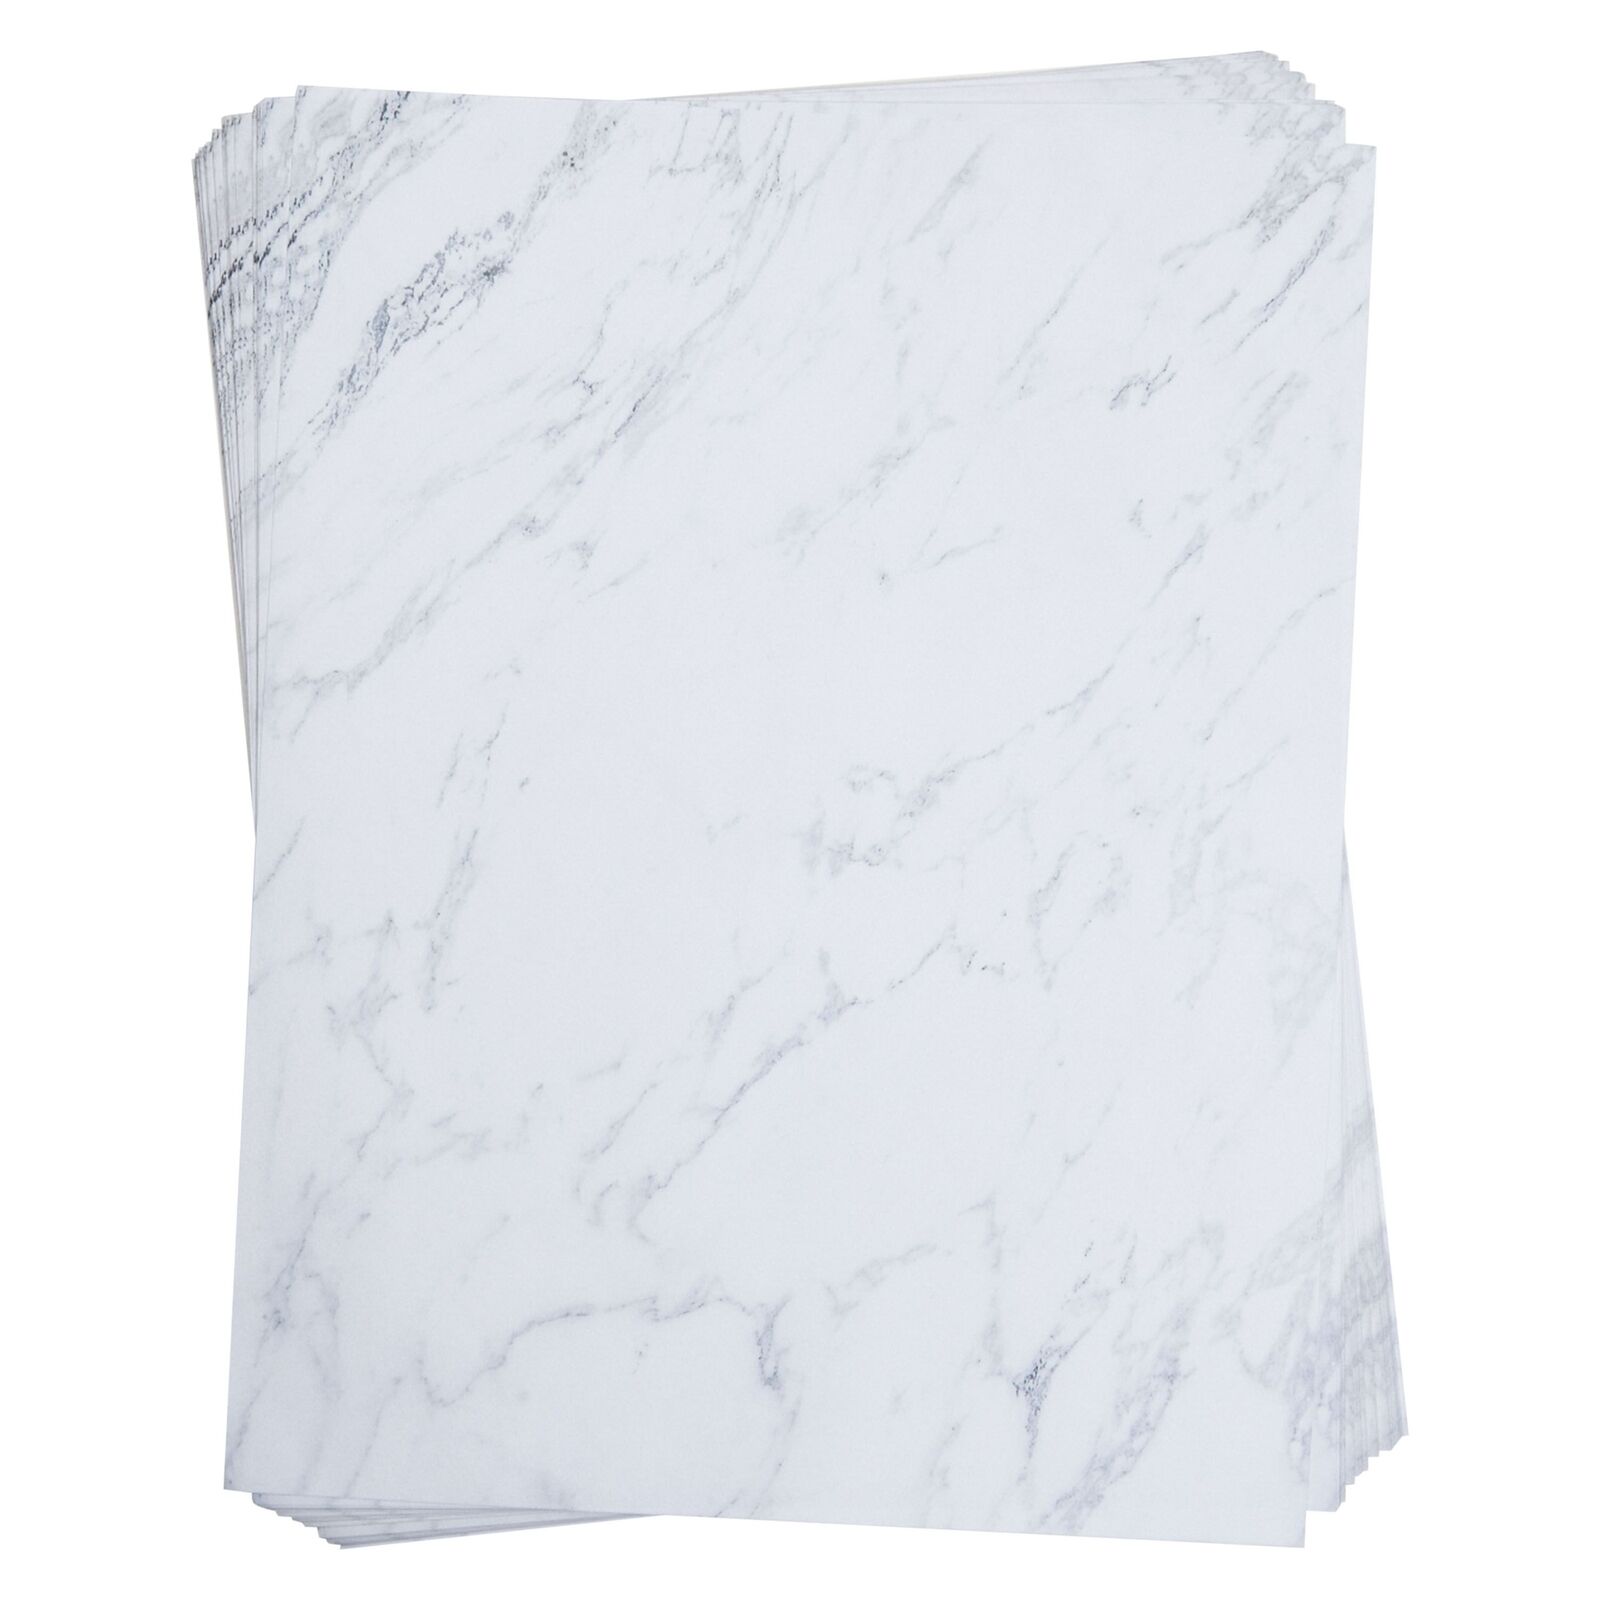 Marble Paper, Stationery, Decorative Paper for Printer, 8.5x11 In, 48 Sheets